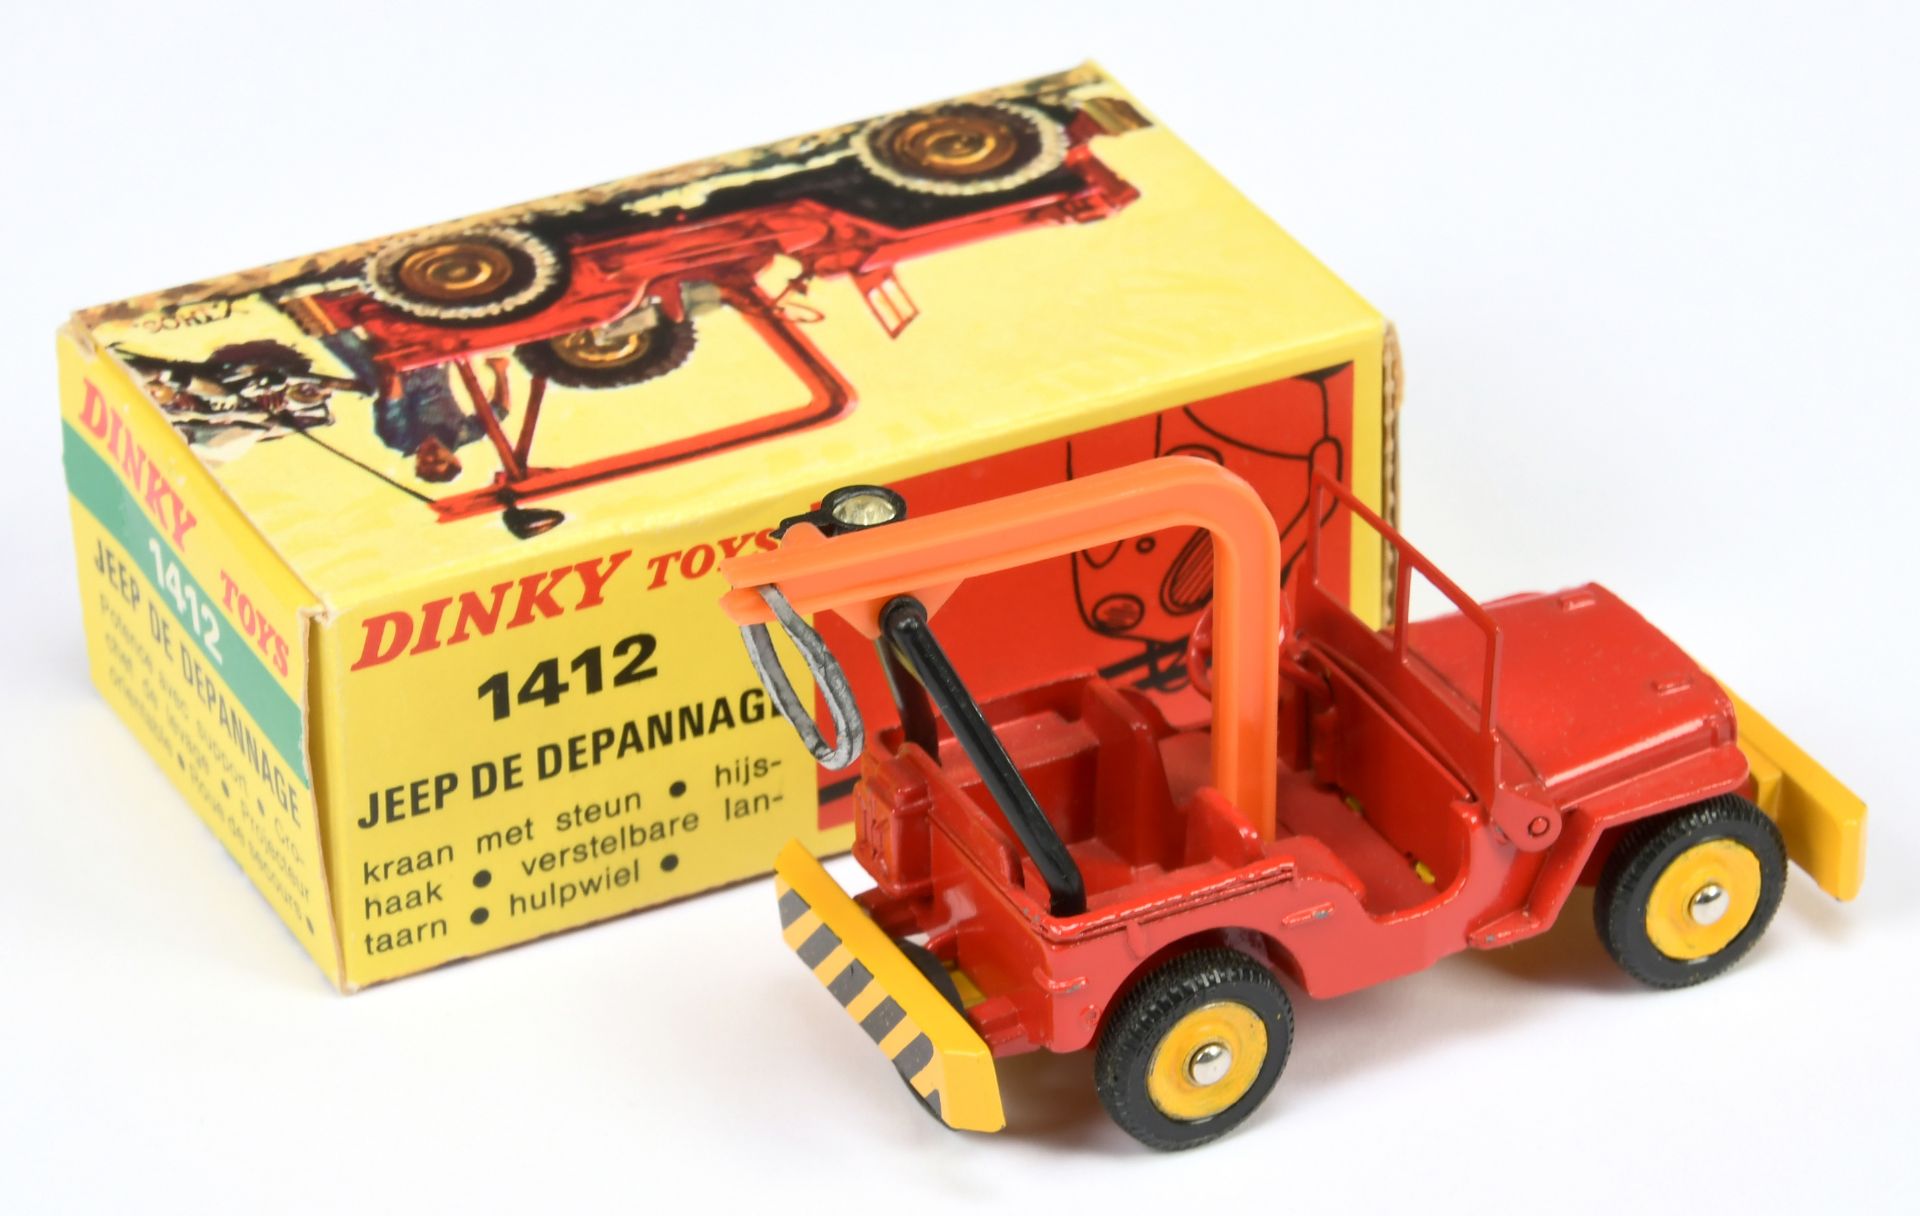 French Dinky Toys 1412 Jeep De Depannage - Red and yellow including concave hubs, orange plastic ... - Image 2 of 2